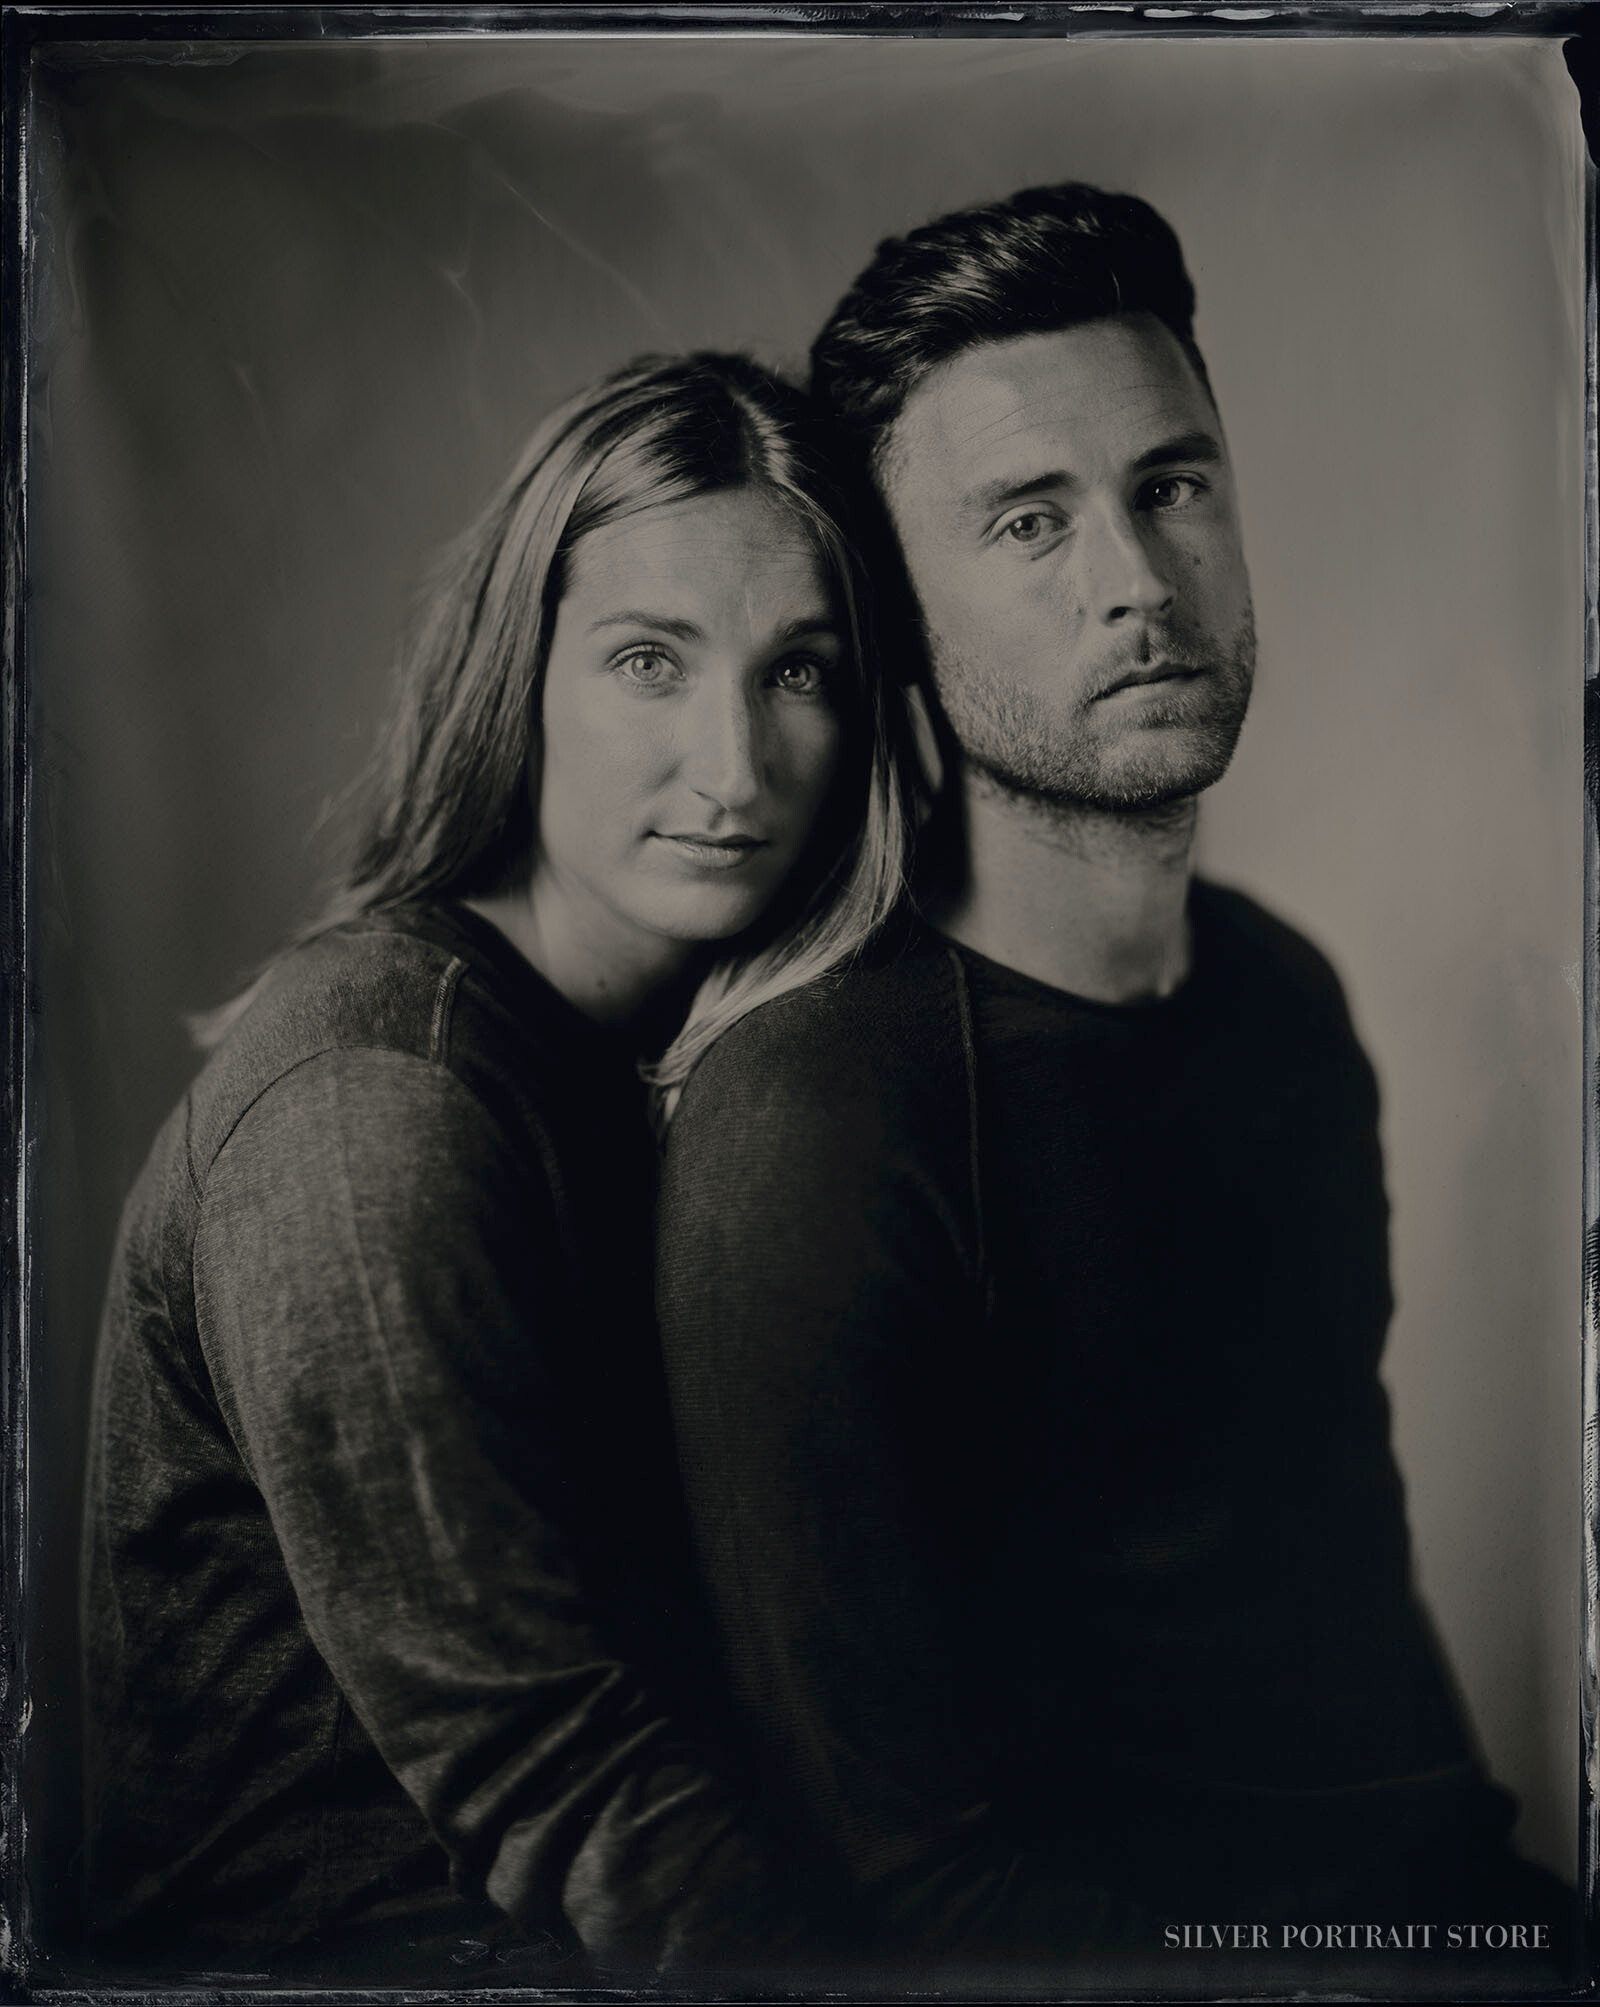 Minke & Ate-Silver Portrait Store-Scan from Wet plate collodion-Tintype 20 x 25 cm.